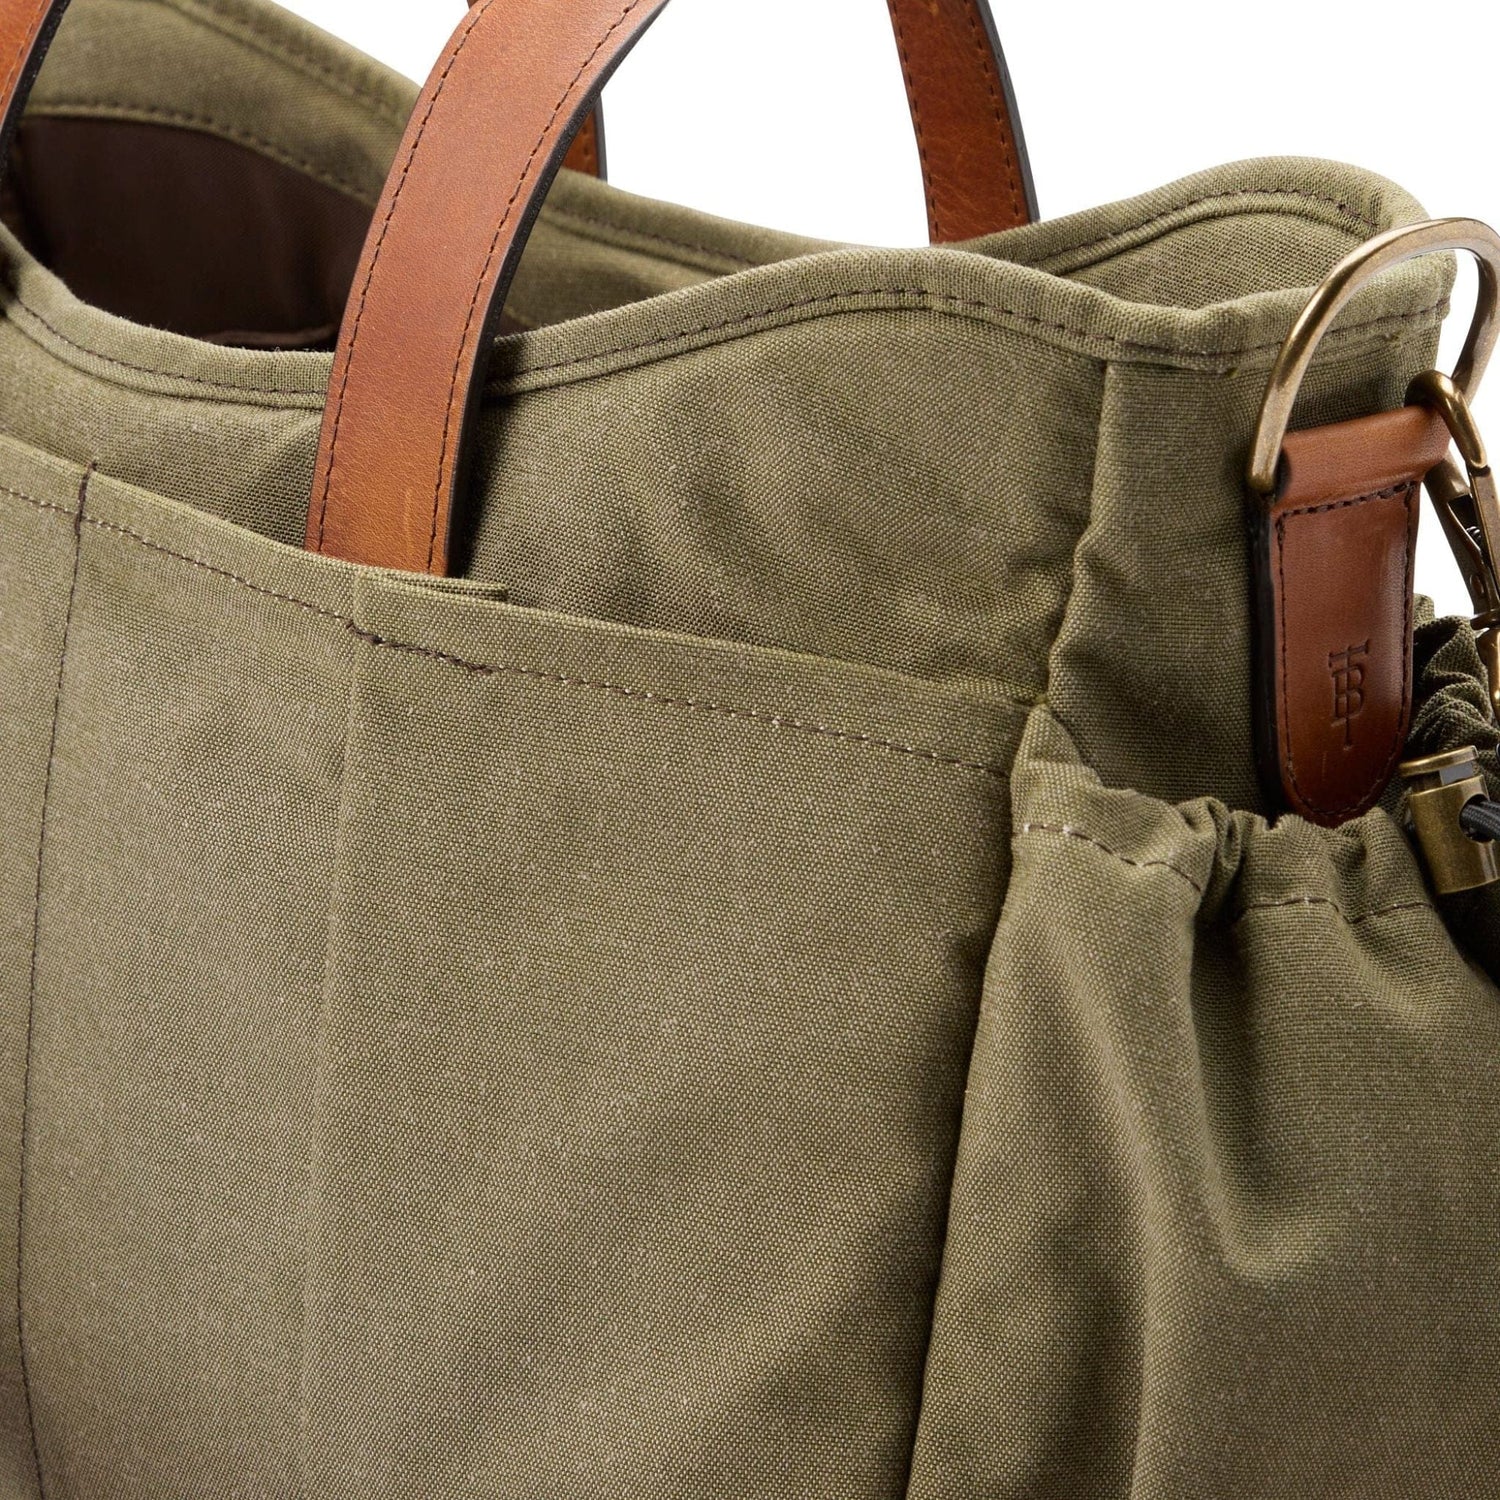 The Canvas Transport Carryall Tote Bag